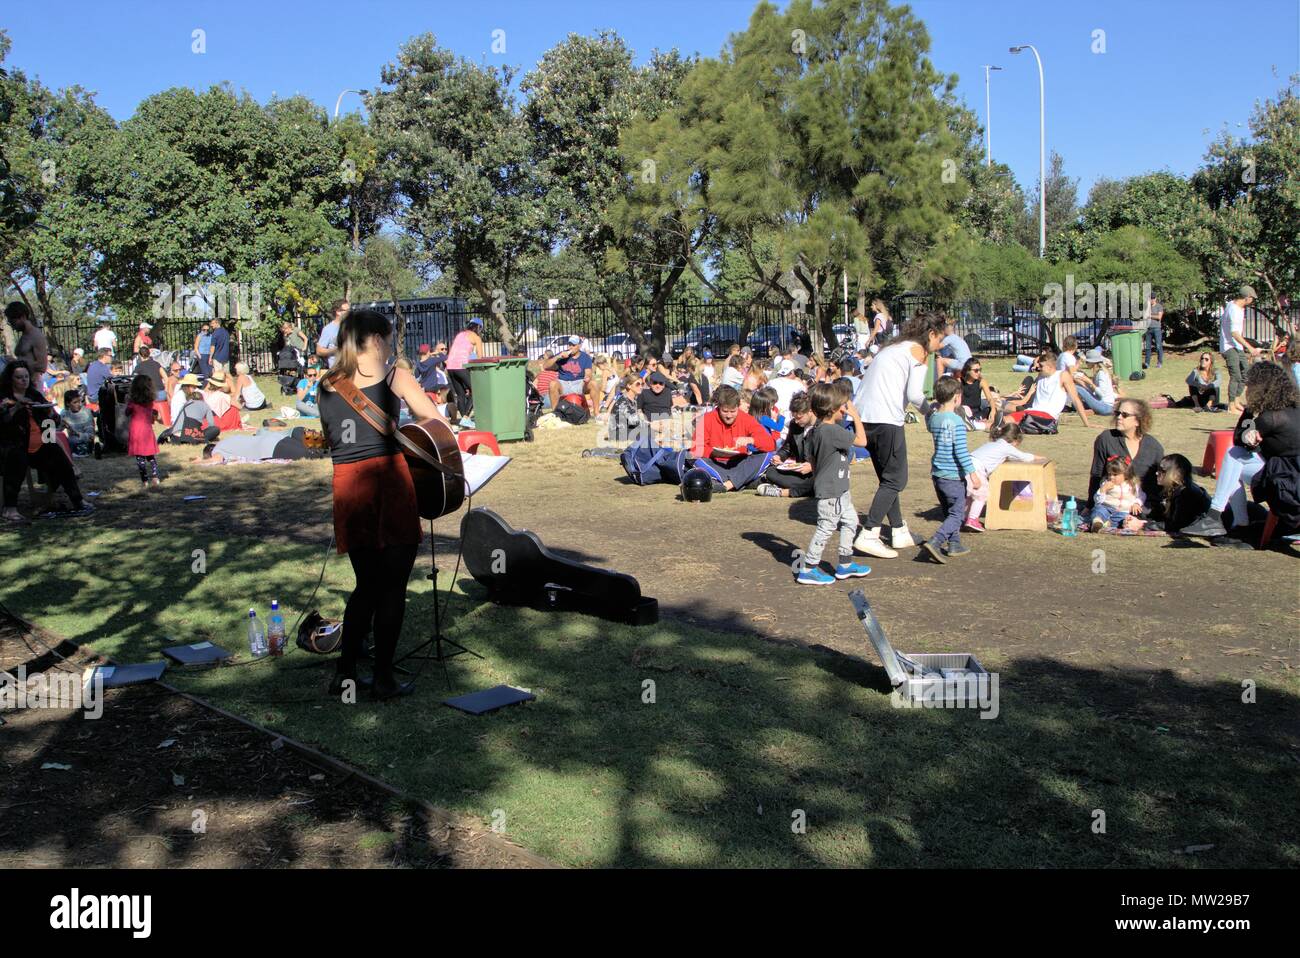 People relaxing in Sydney park, Bondi Australia. People enjoying day out sitting in park at Bondi Farmers Market. People of all ages sitting in sun. Stock Photo